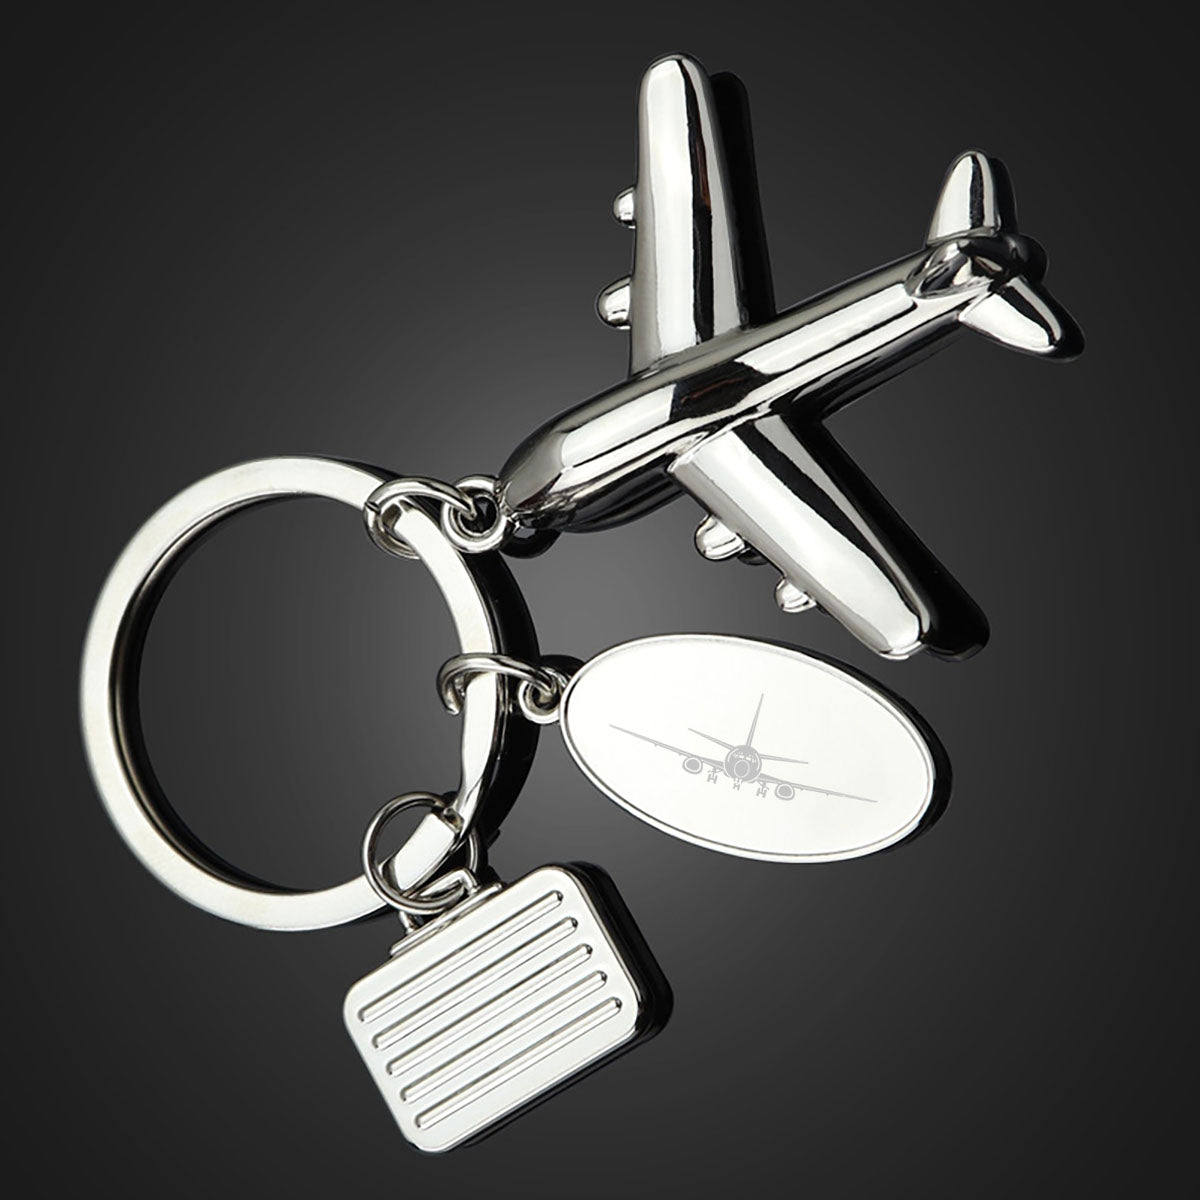 Boeing 737 Silhouette Designed Suitcase Airplane Key Chains